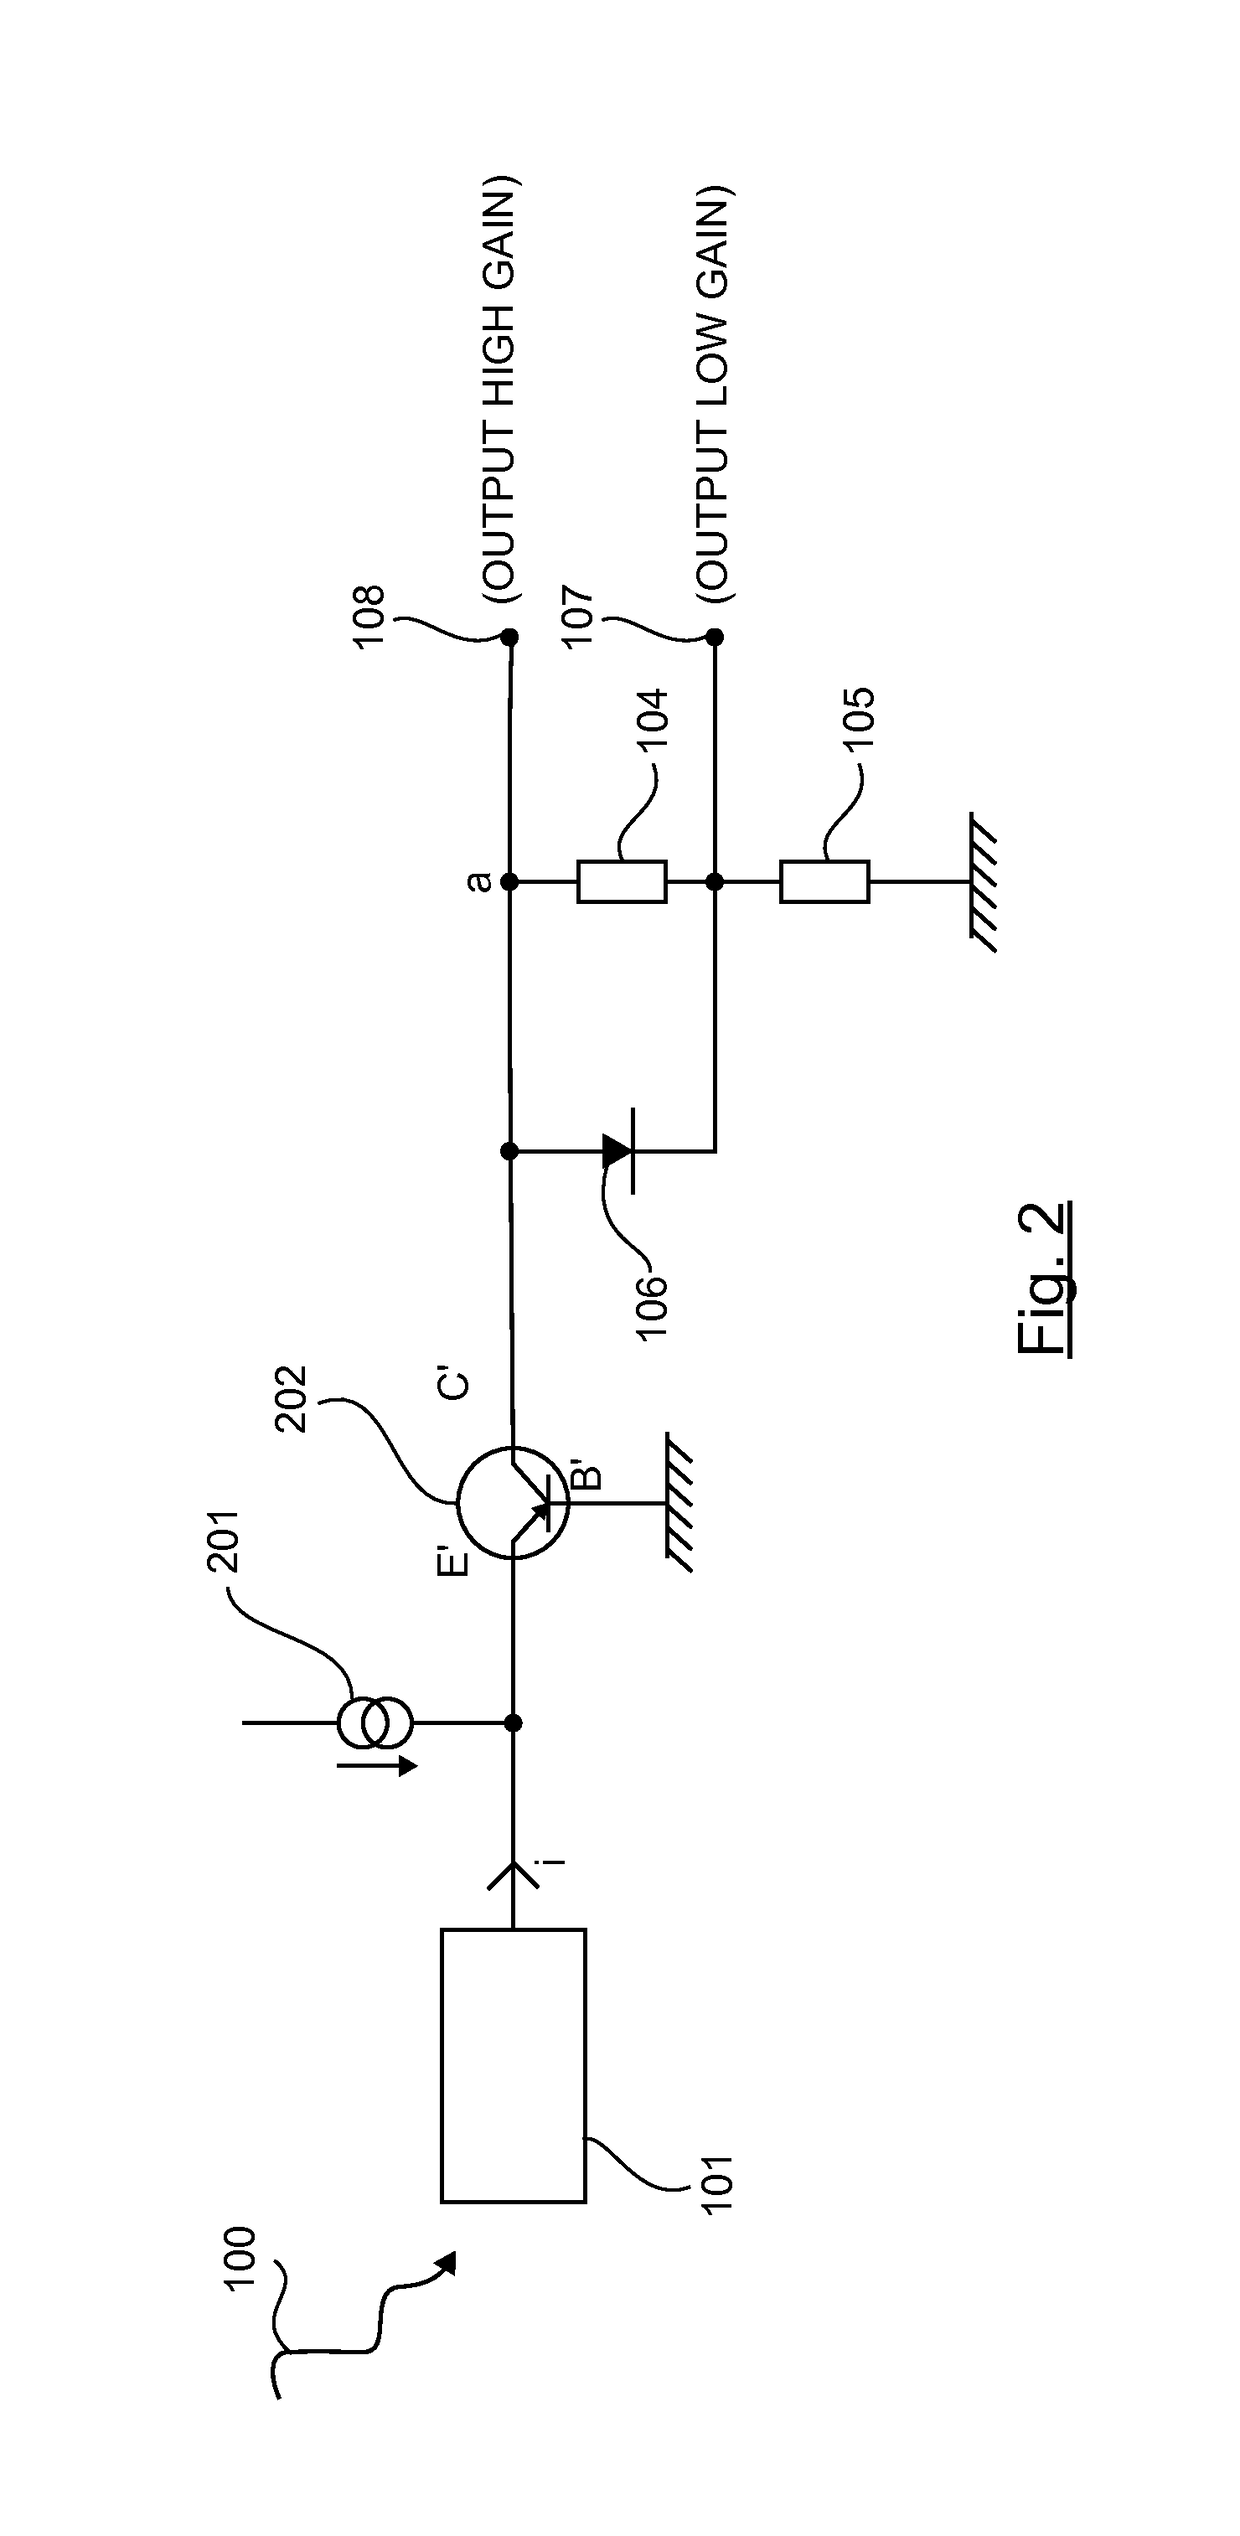 Electronic circuit comprising a current conveyor arranged with an anti-saturation device and corresponding device for detecting photons